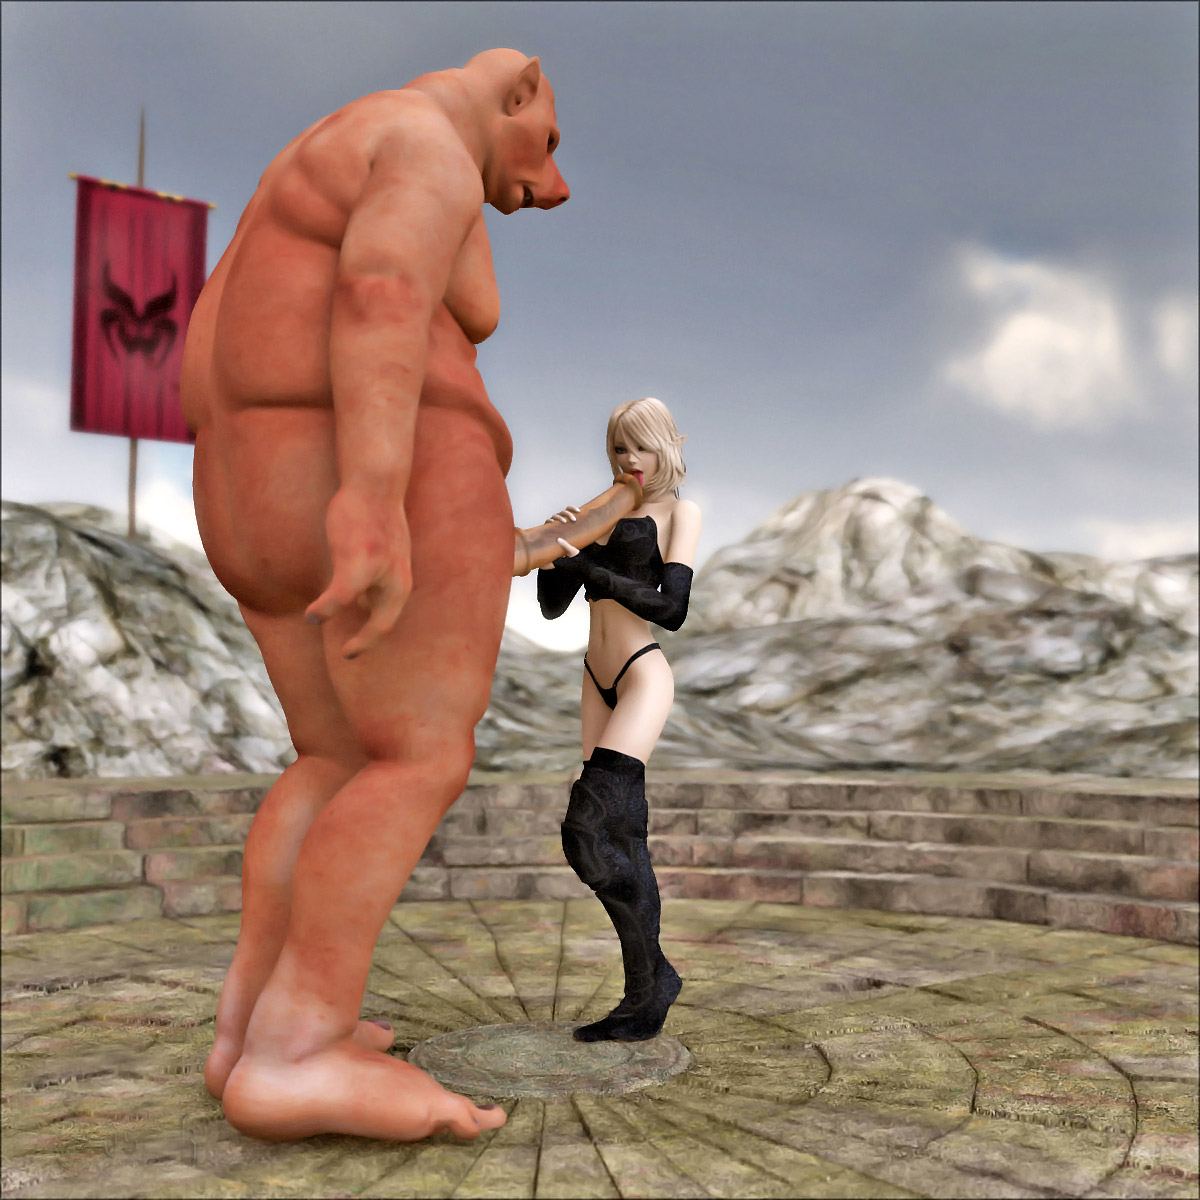 Chicks And Beasts Fantasy Porn - hot chick hooks up with beast for 3d fantasy monster porn |  3dwerewolfporn.com